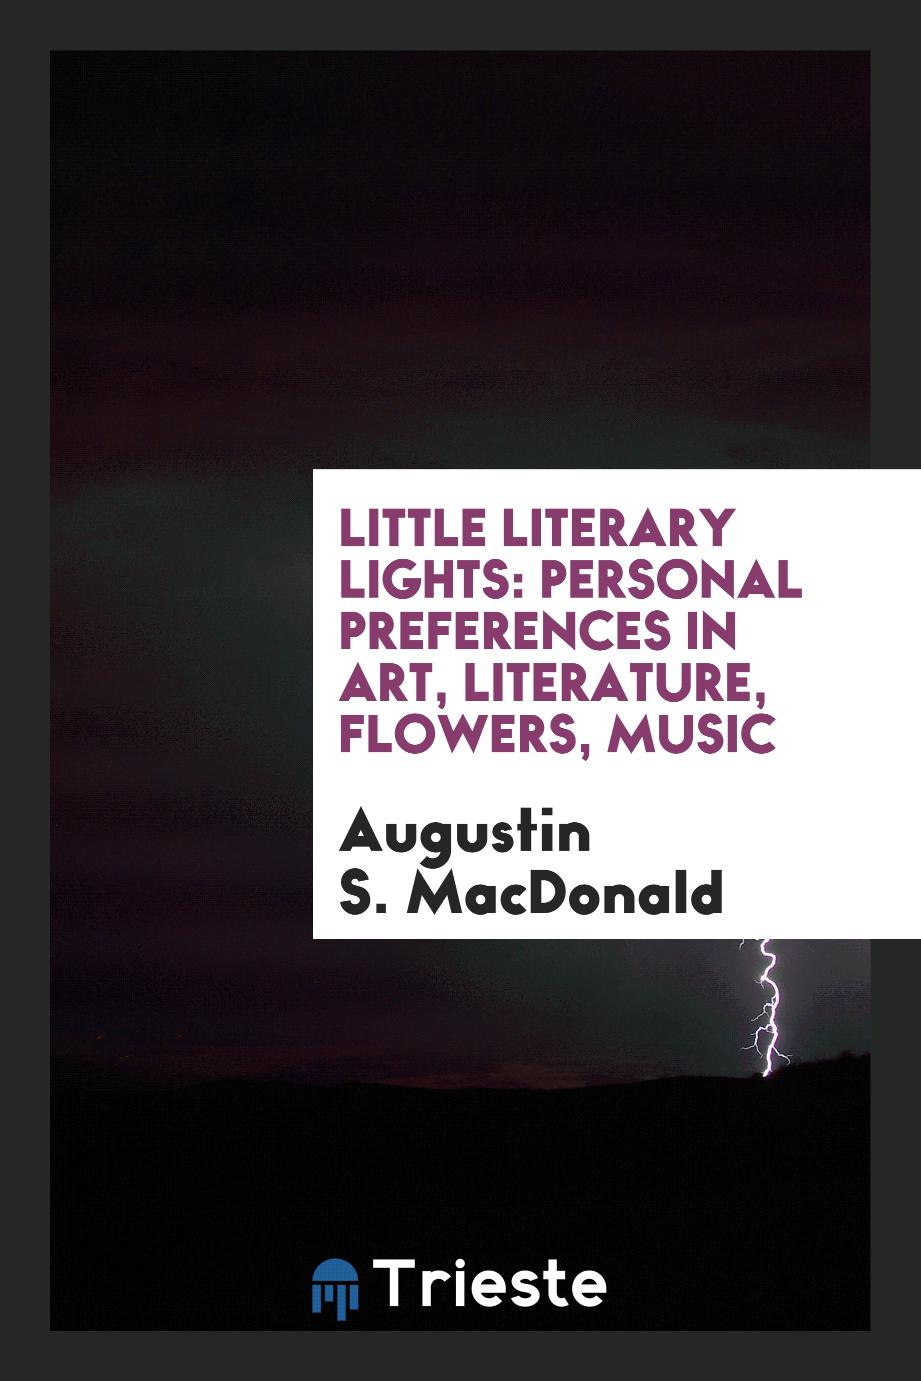 Little Literary Lights: Personal Preferences in Art, Literature, Flowers, Music